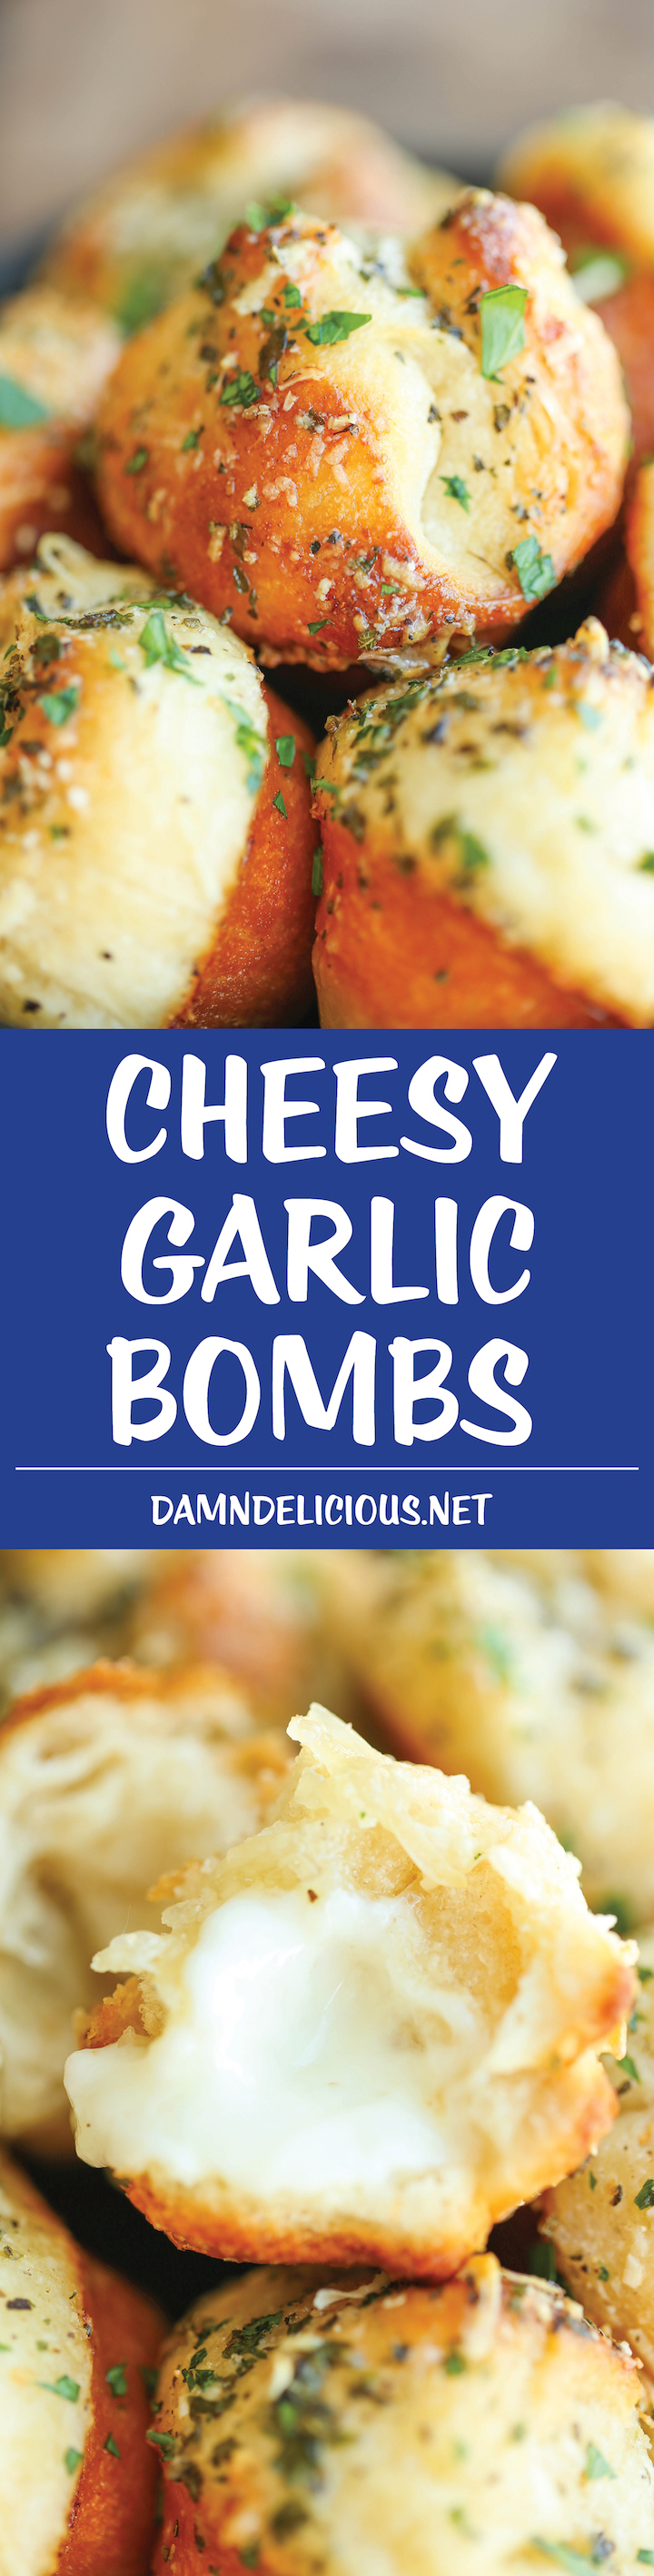 Cheesy Garlic Bombs - Mini garlic bread bites slathered in buttery goodness and stuffed with melted mozzarella cheesiness. So good and irresistible!